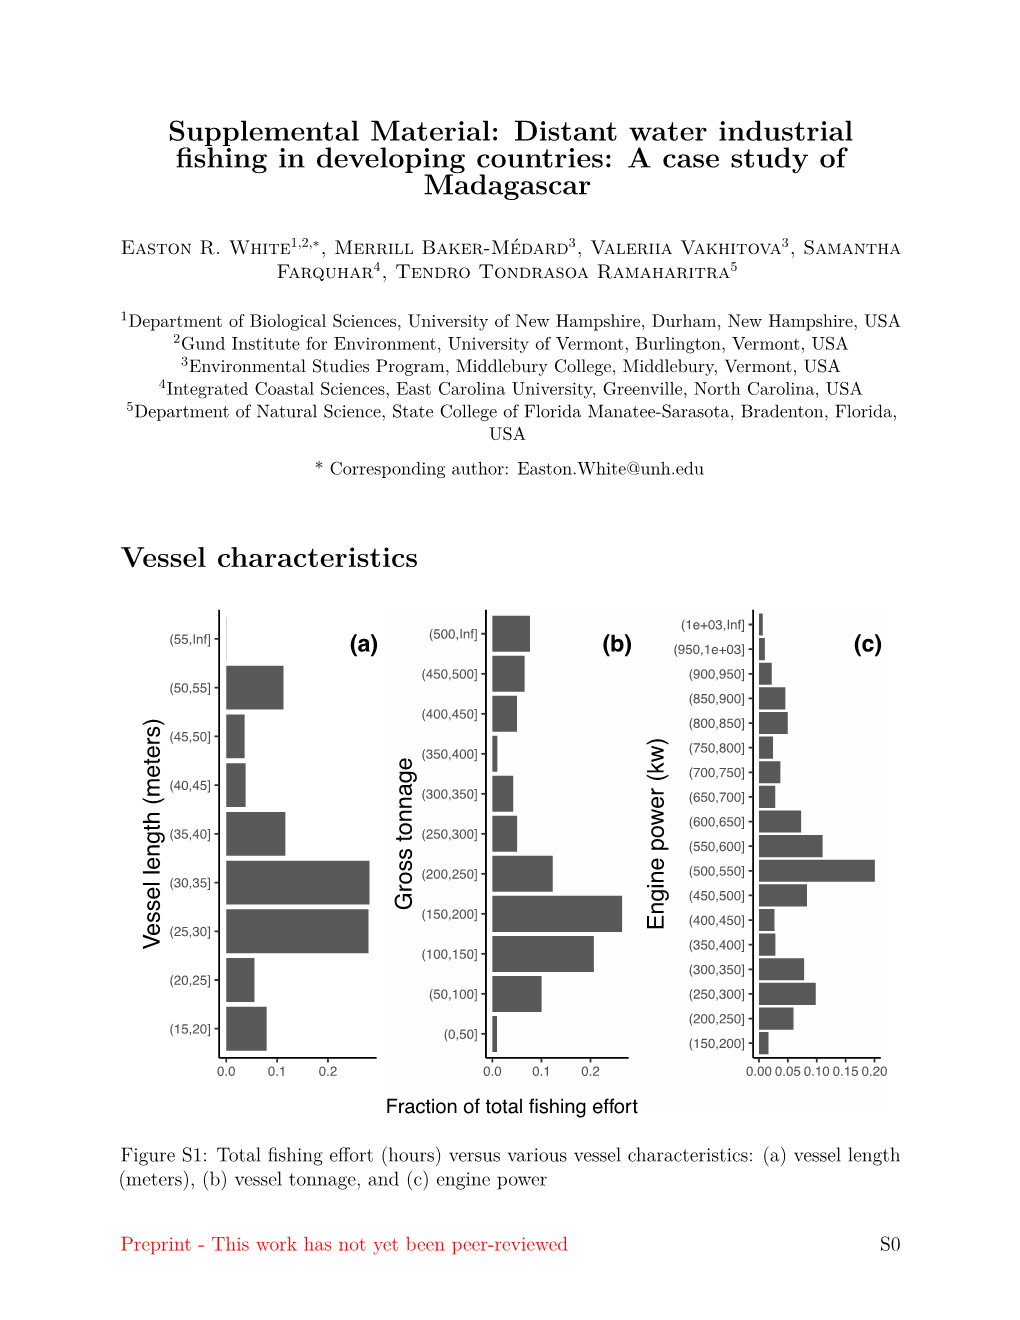 Supplemental Material: Distant Water Industrial ﬁshing in Developing Countries: a Case Study of Madagascar